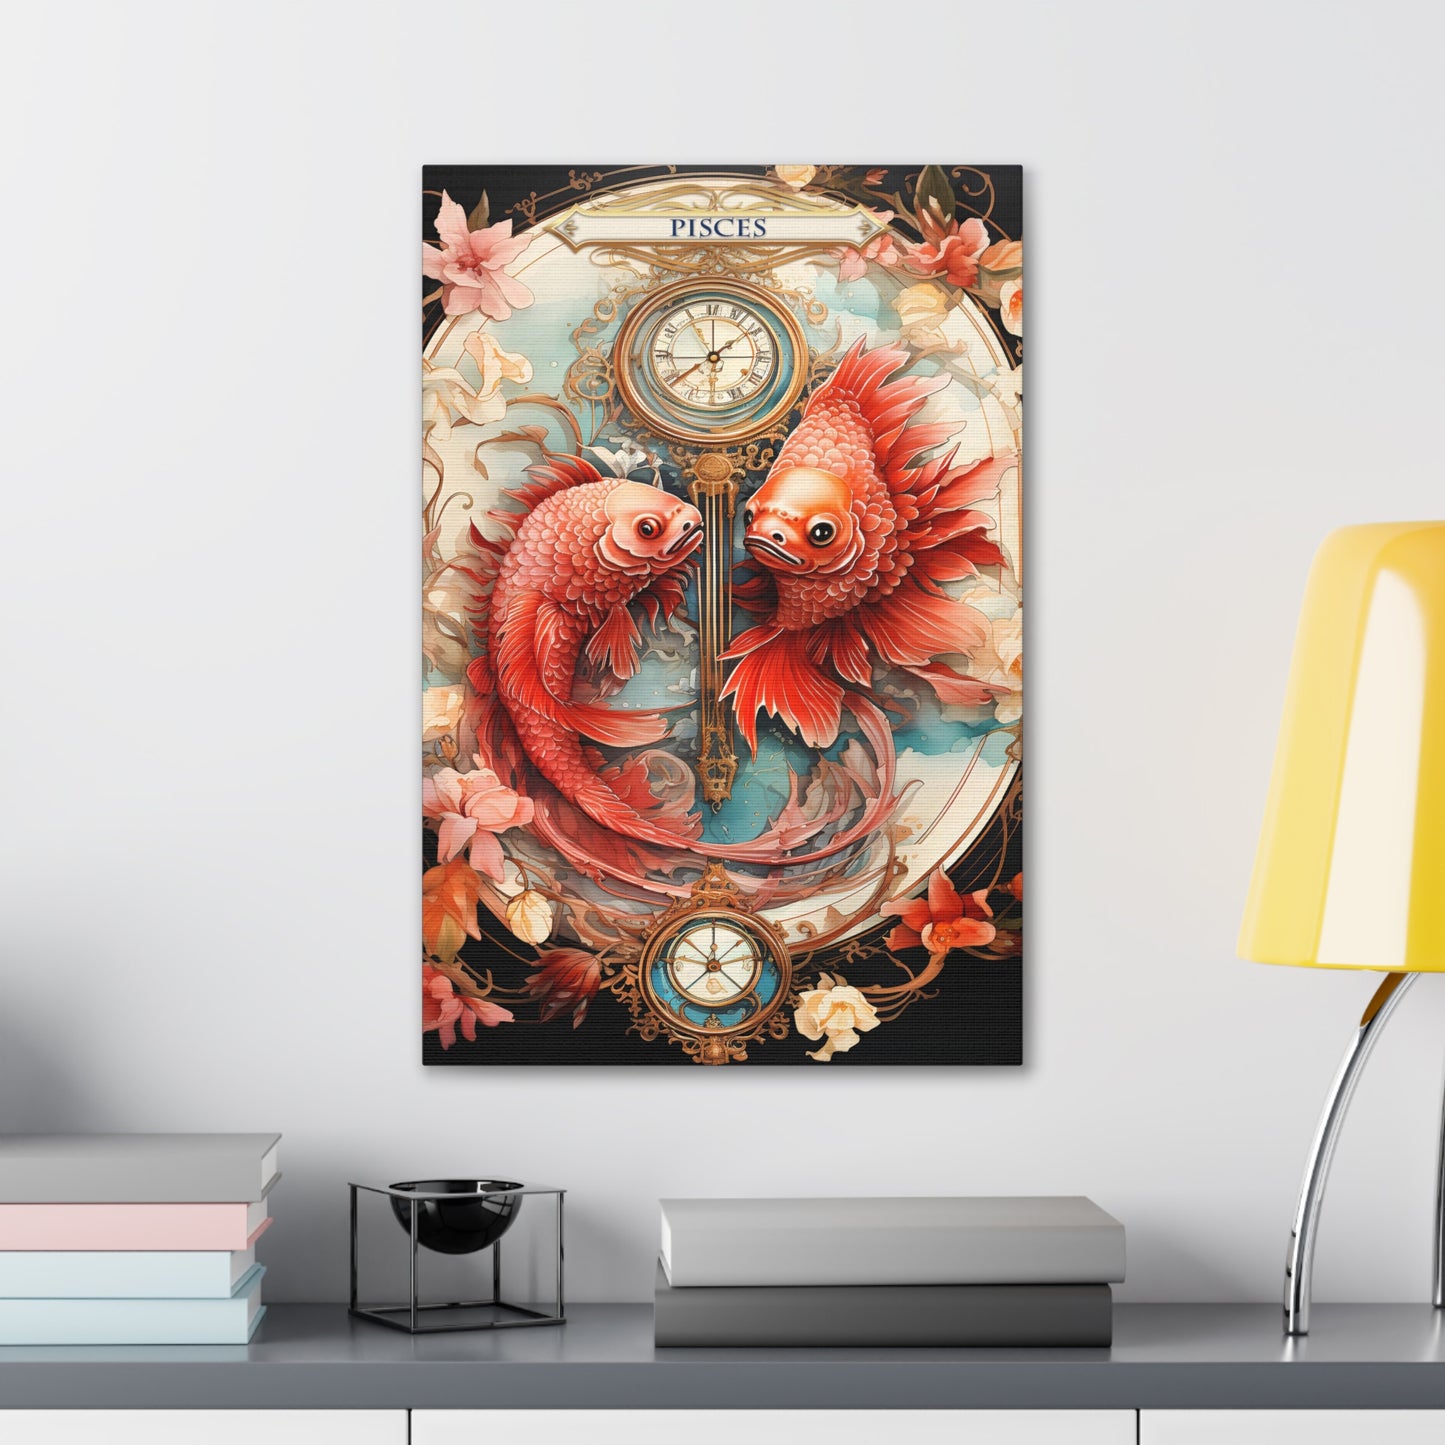 Cotton Canvas wall art print of a Pisces Zodiac image with a floral design element. A modern take of an elegant astrological symbol